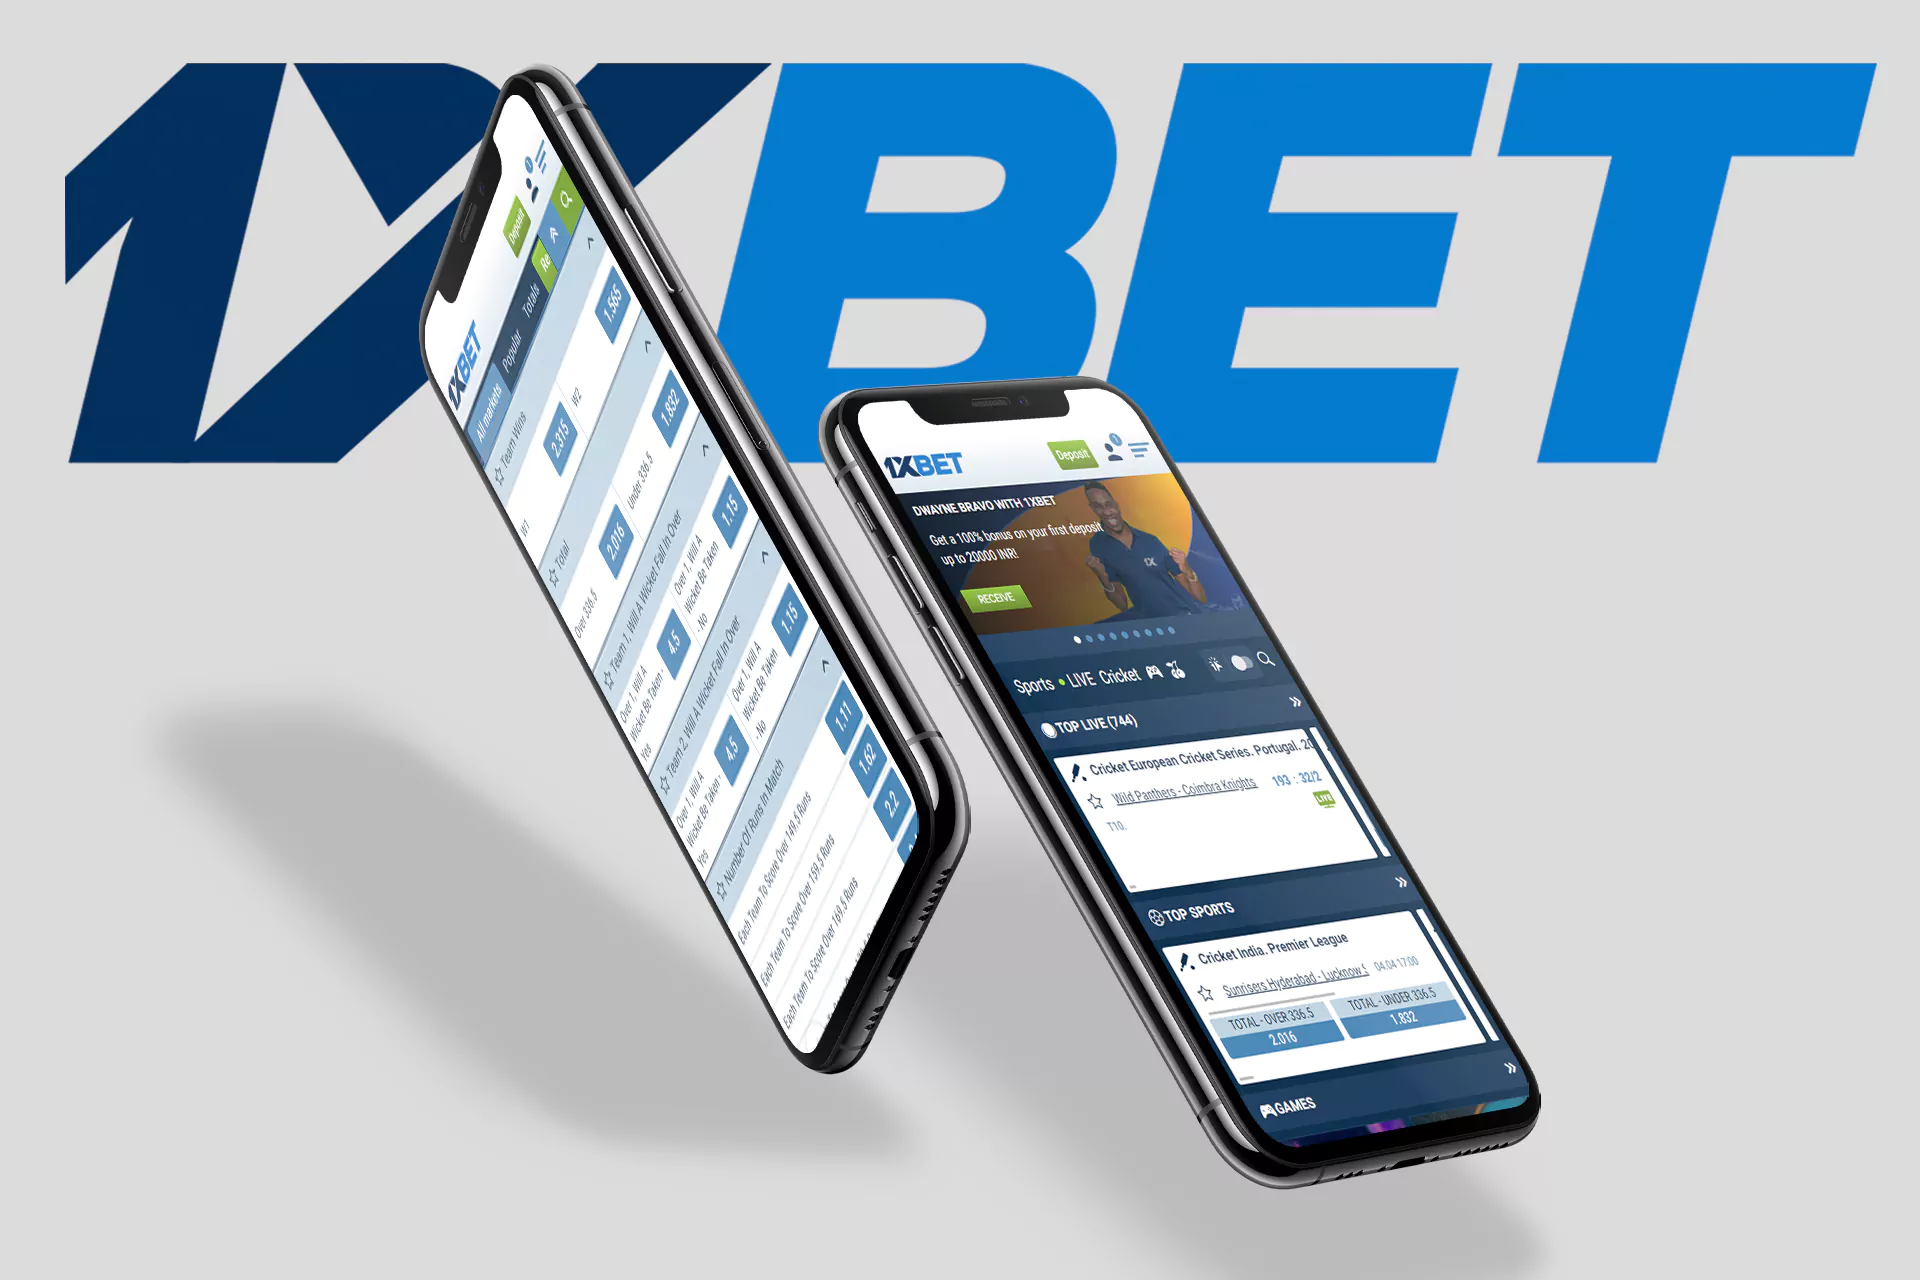 You can download the 1xBet app for free.